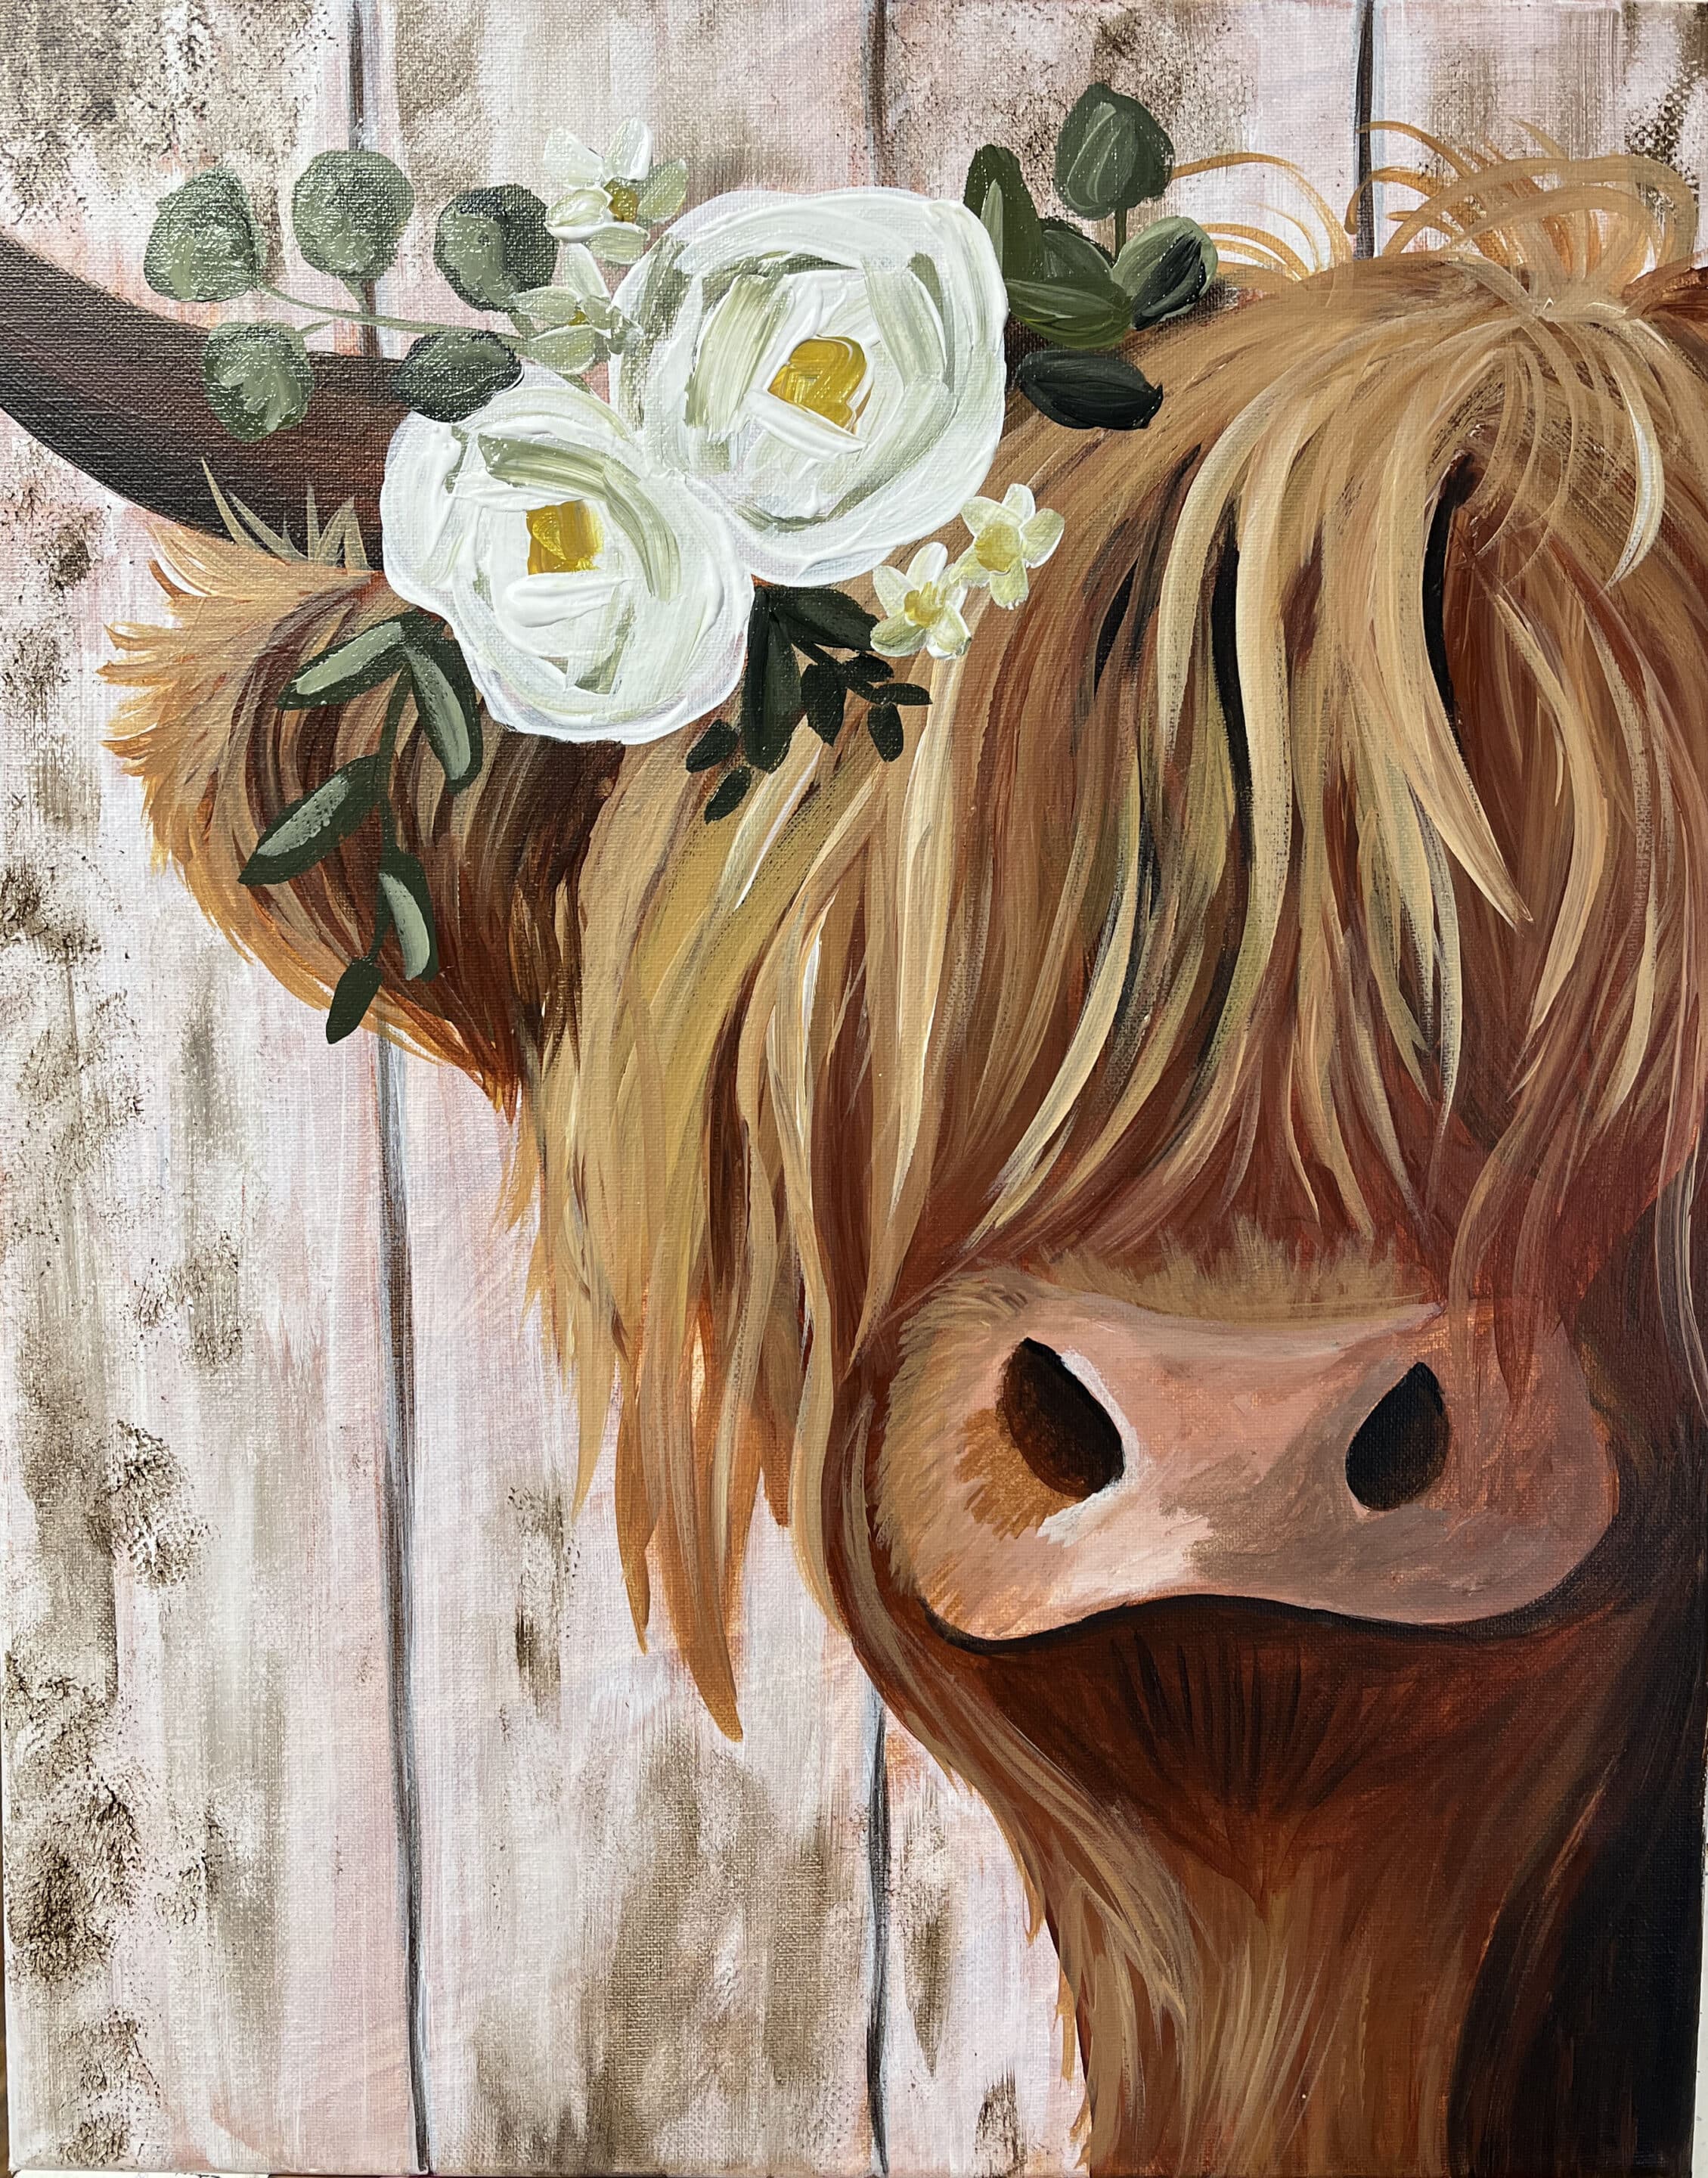 Art At Home: Highland Cow Tutorial Step by Step - Uncorked Canvas